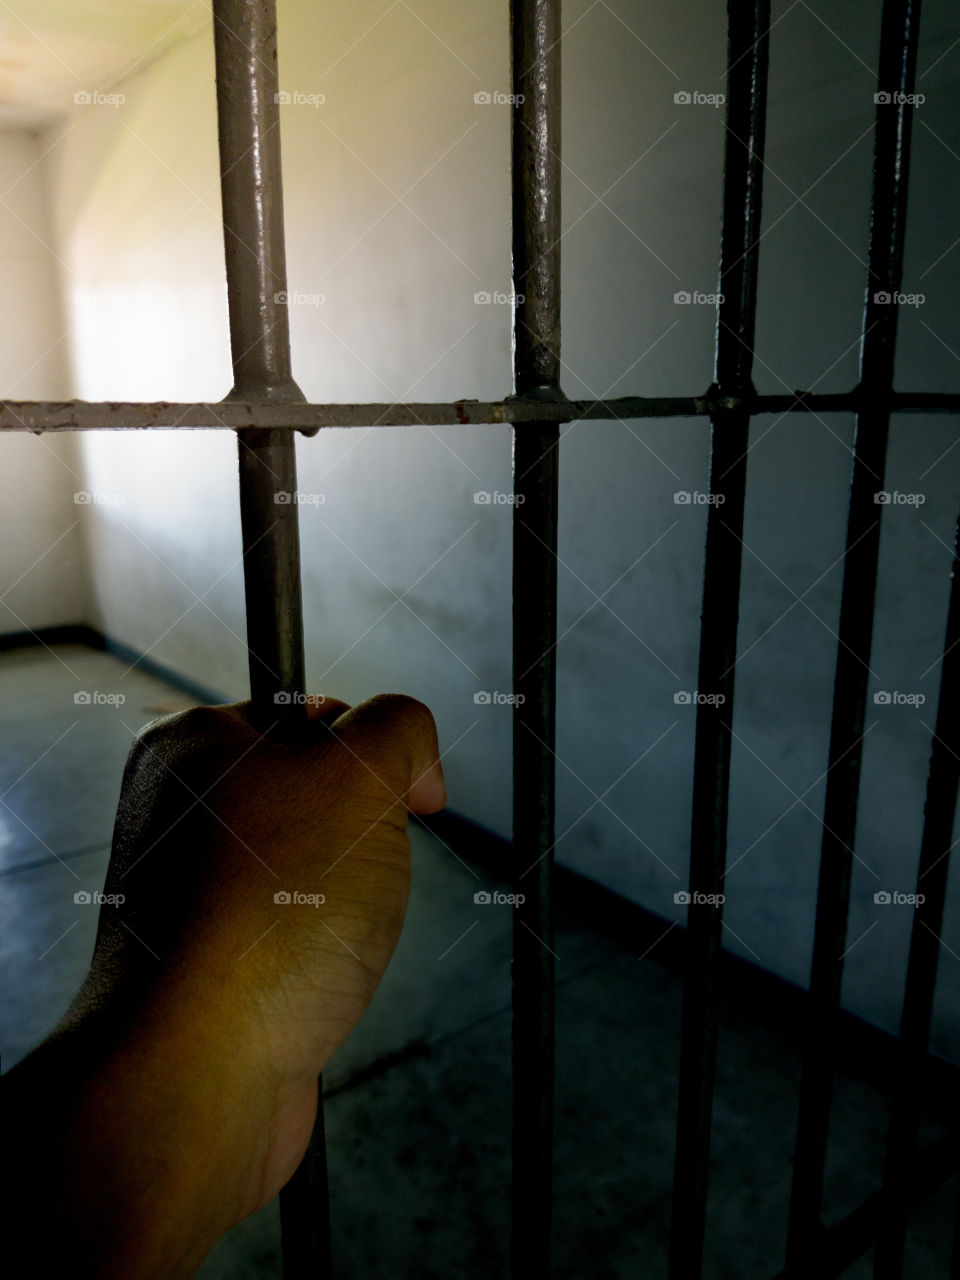 Asian hand put on prison cell